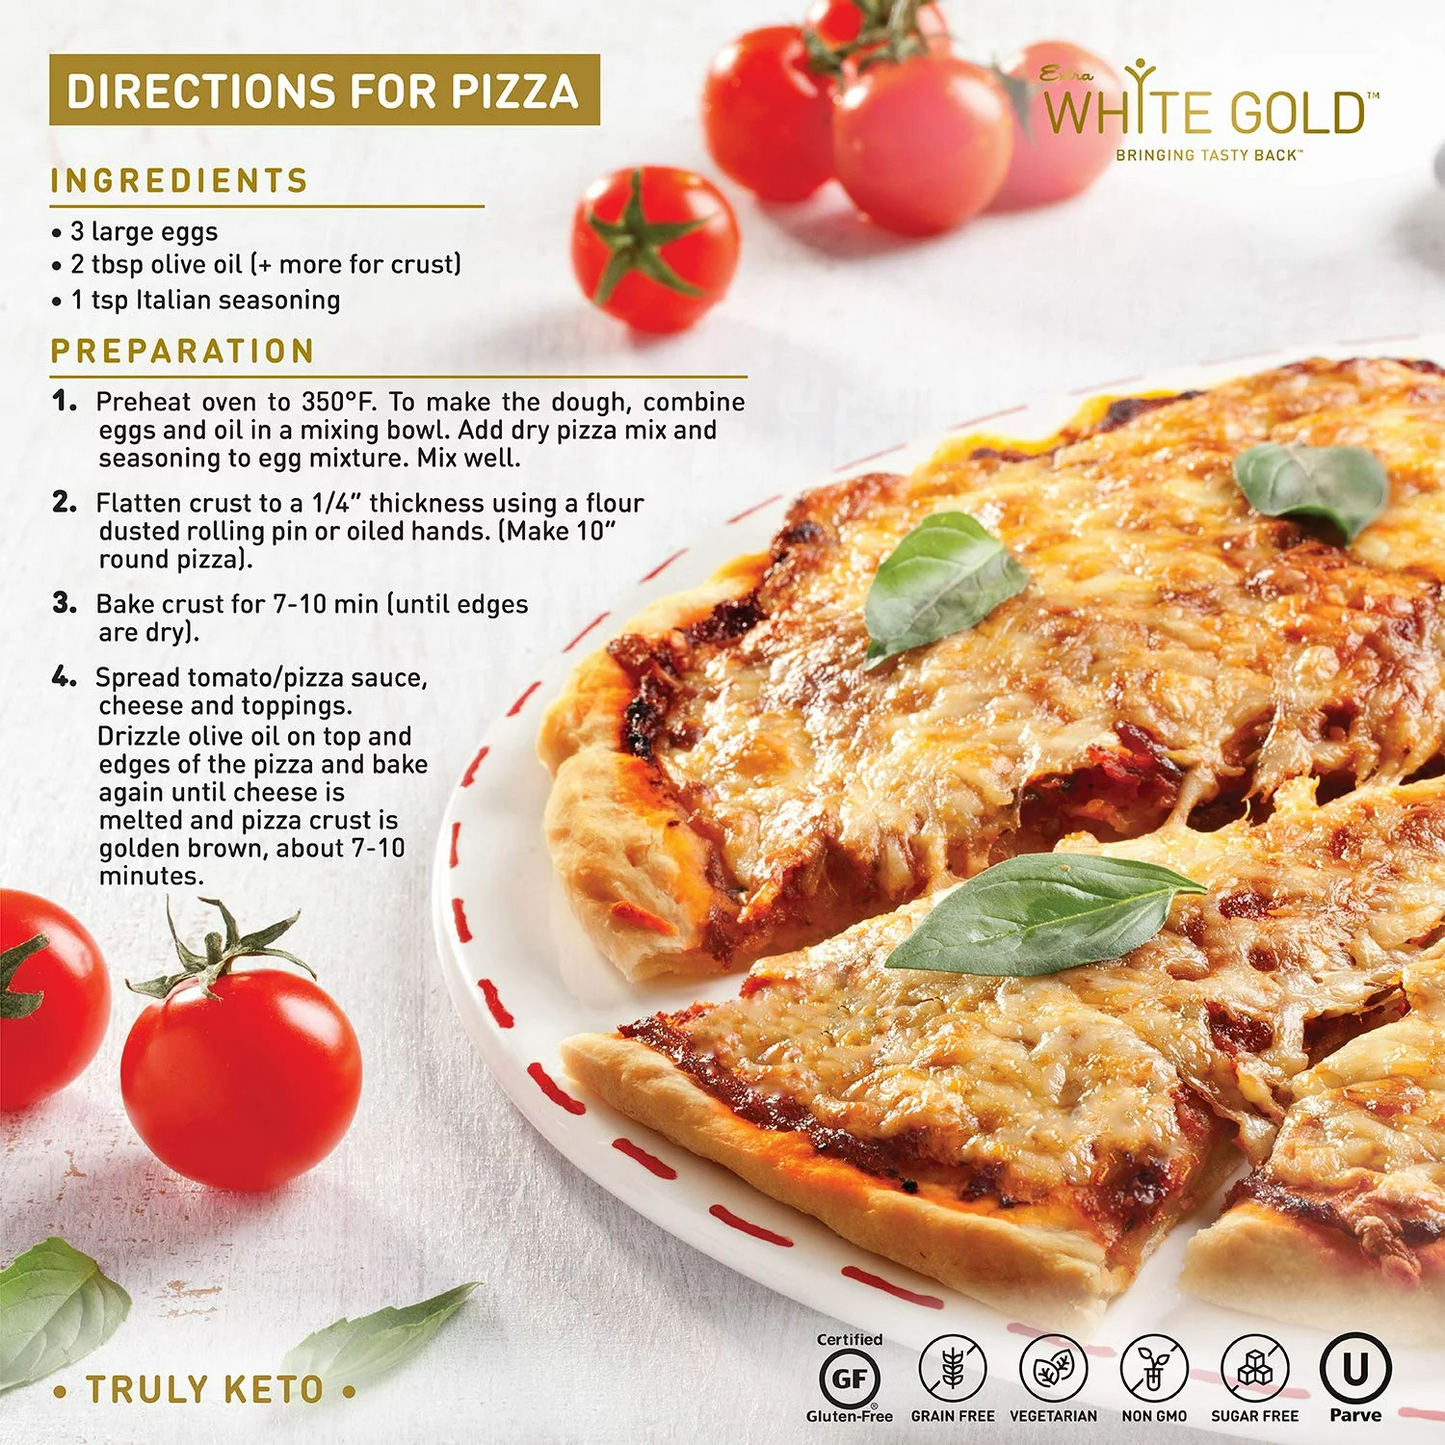 Extra White Gold Pizza, Bread and Biscuit Mix, Keto Baking Mix, Low carb Pizza mix, No sugar added, Gluten Free, Grain Free, Wheat Free, Diabetic, Atkins and WW Friendly (3g net carbs, 12 Servings)